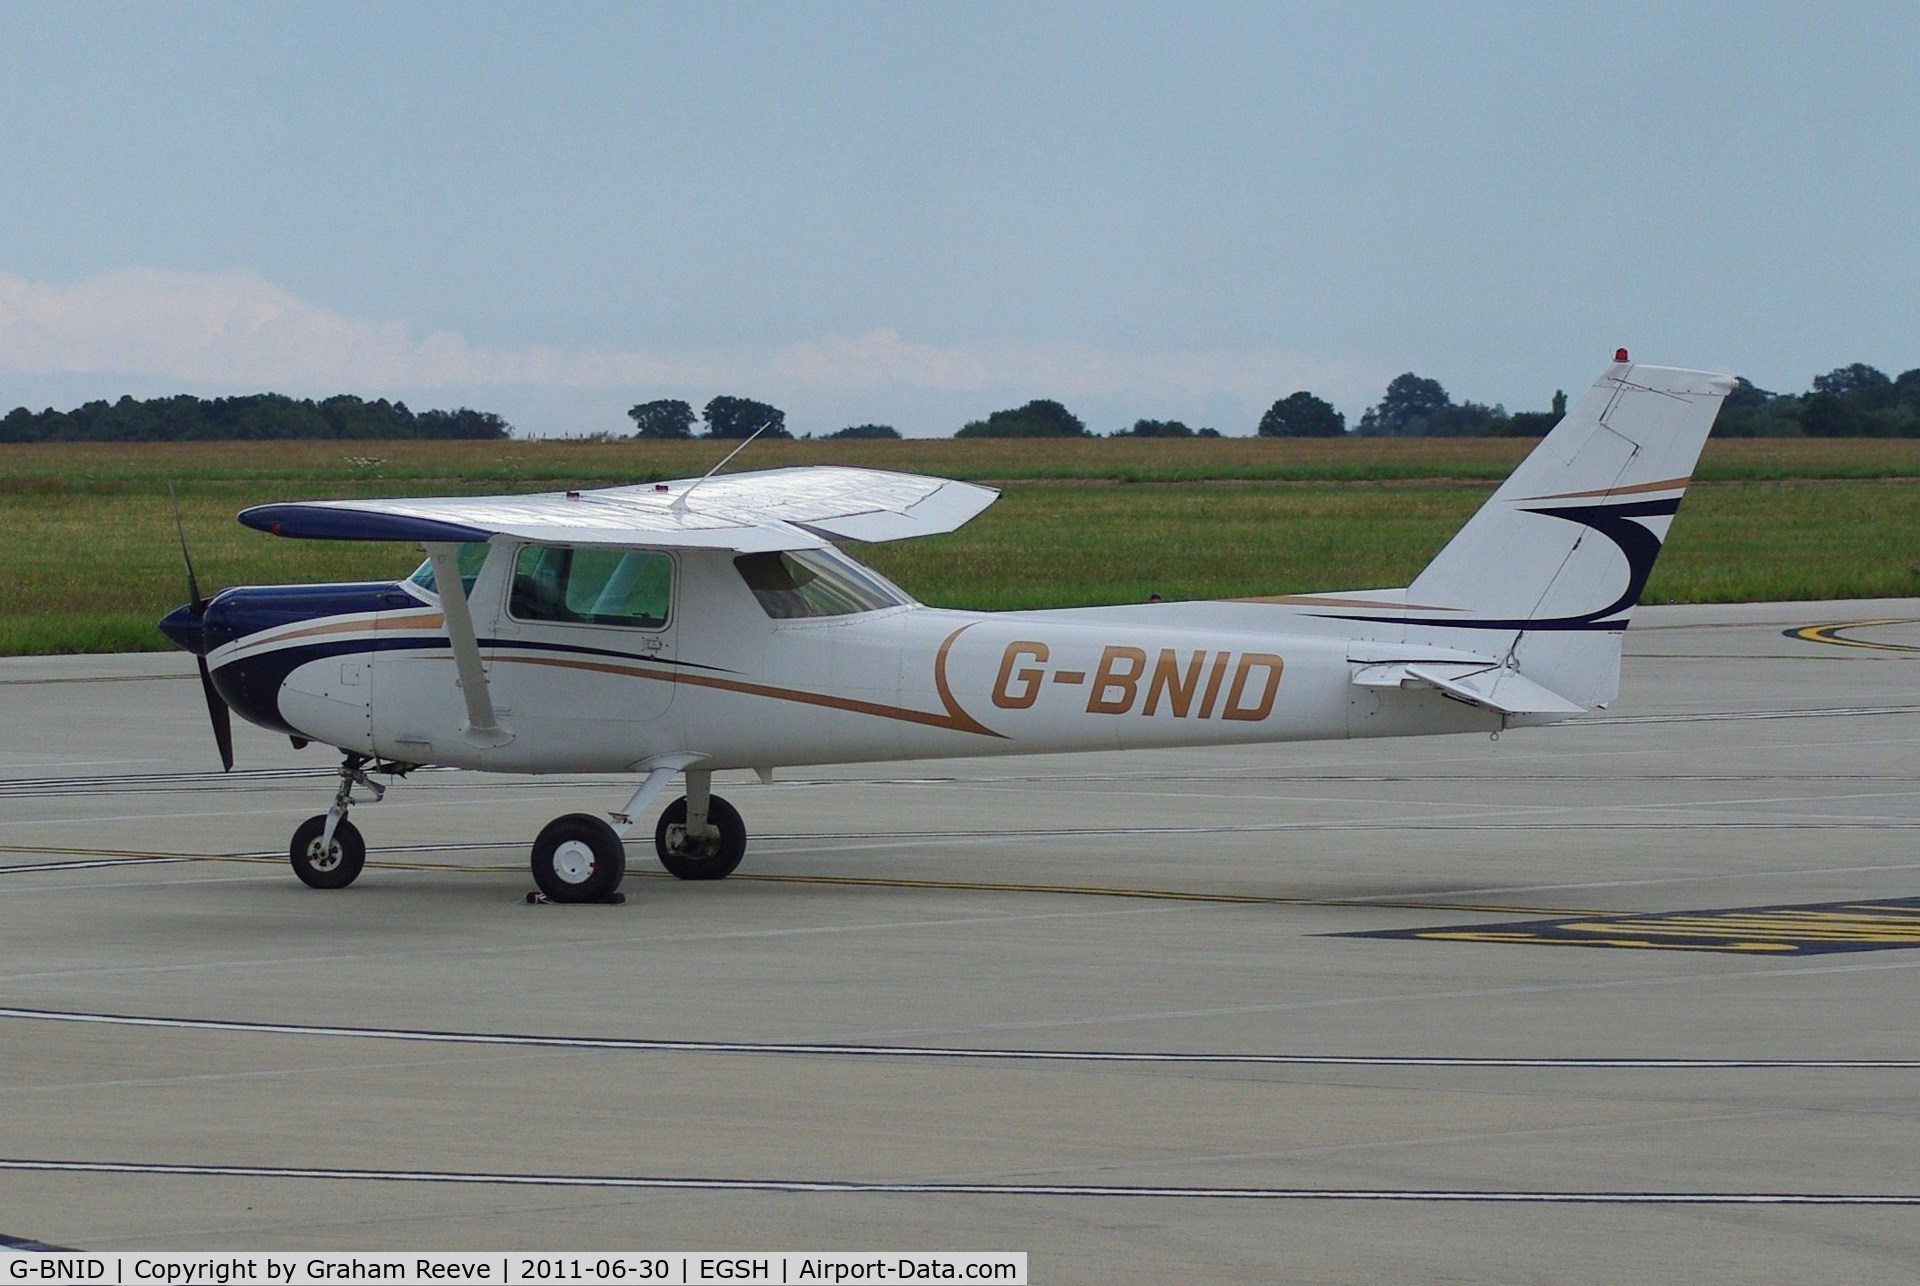 G-BNID, 1981 Cessna 152 C/N 152-84931, Parked at Norwich.